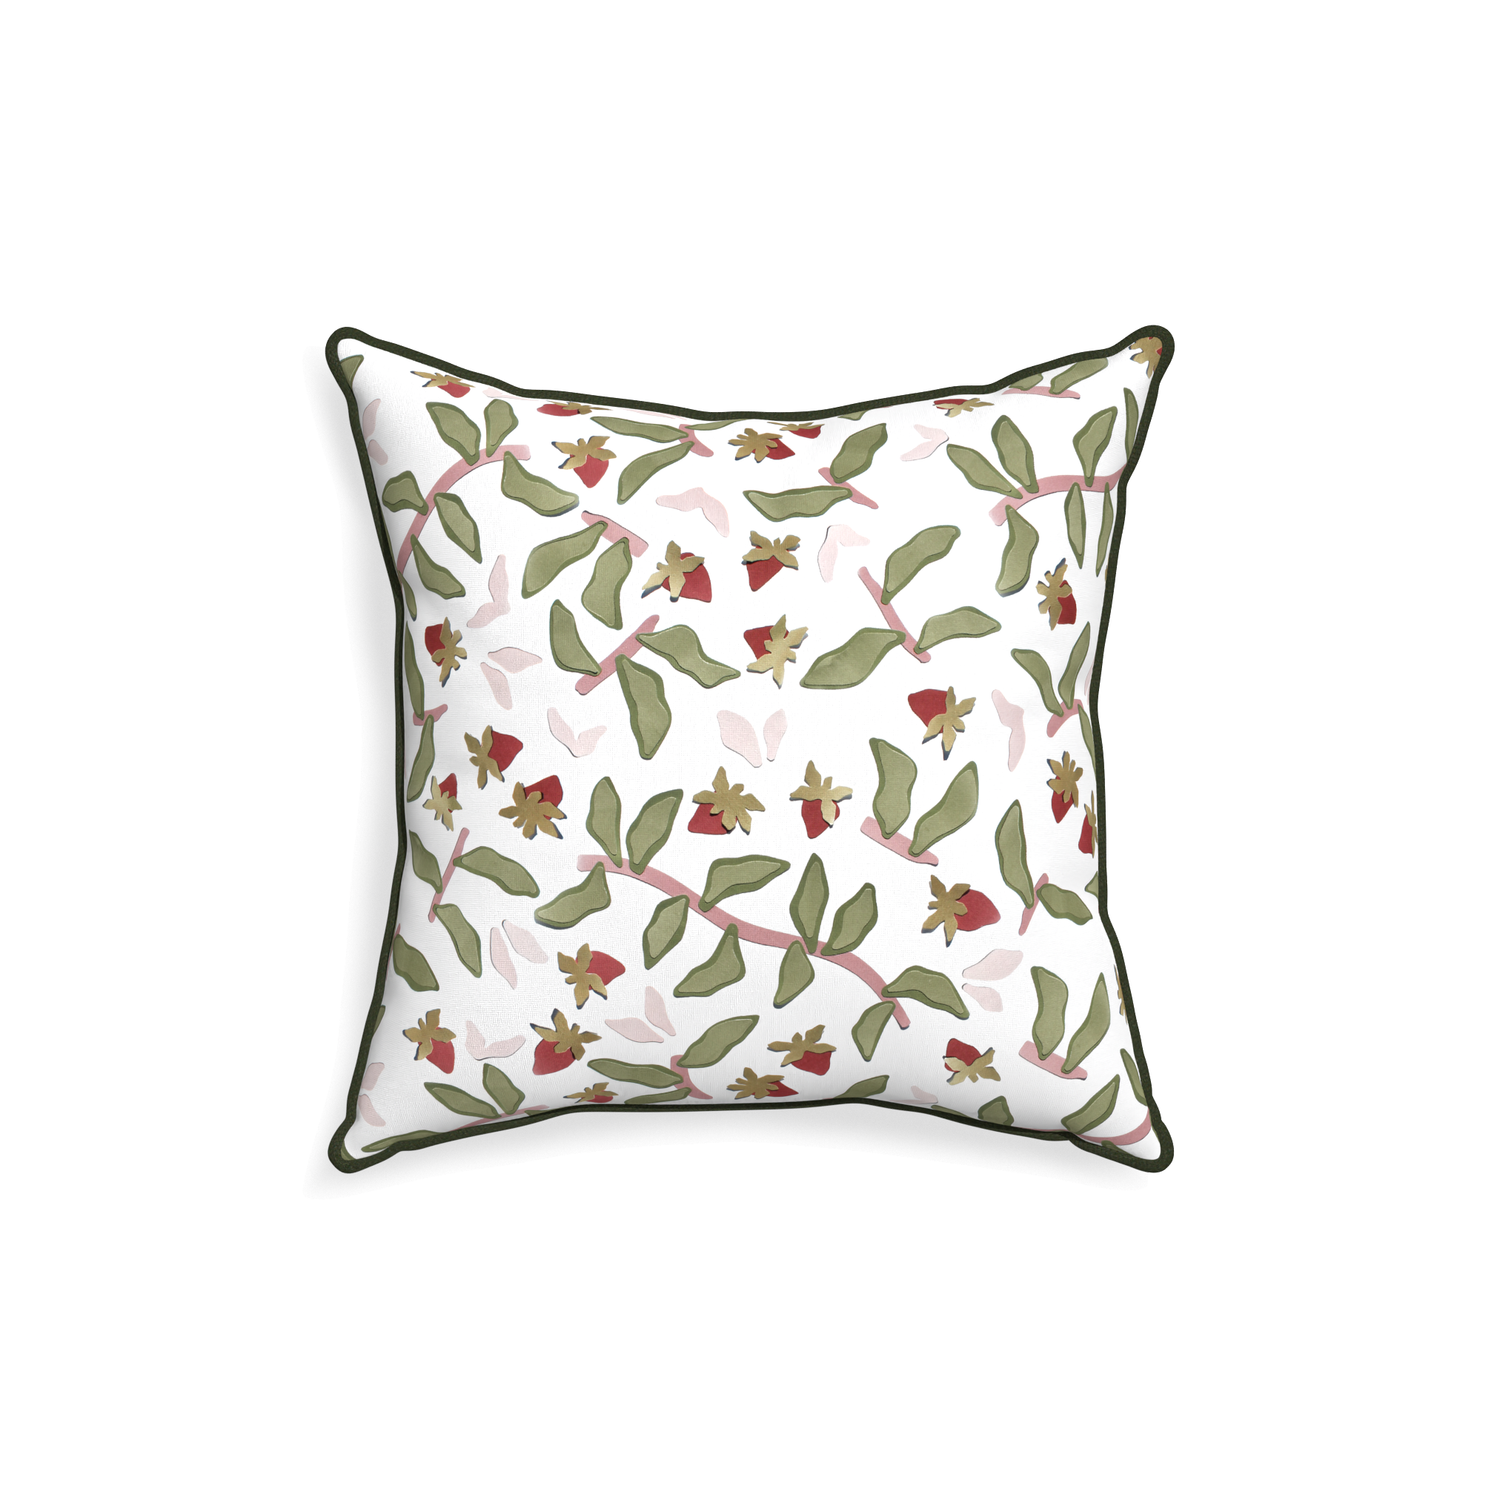 18-square nellie custom strawberry & botanicalpillow with f piping on white background